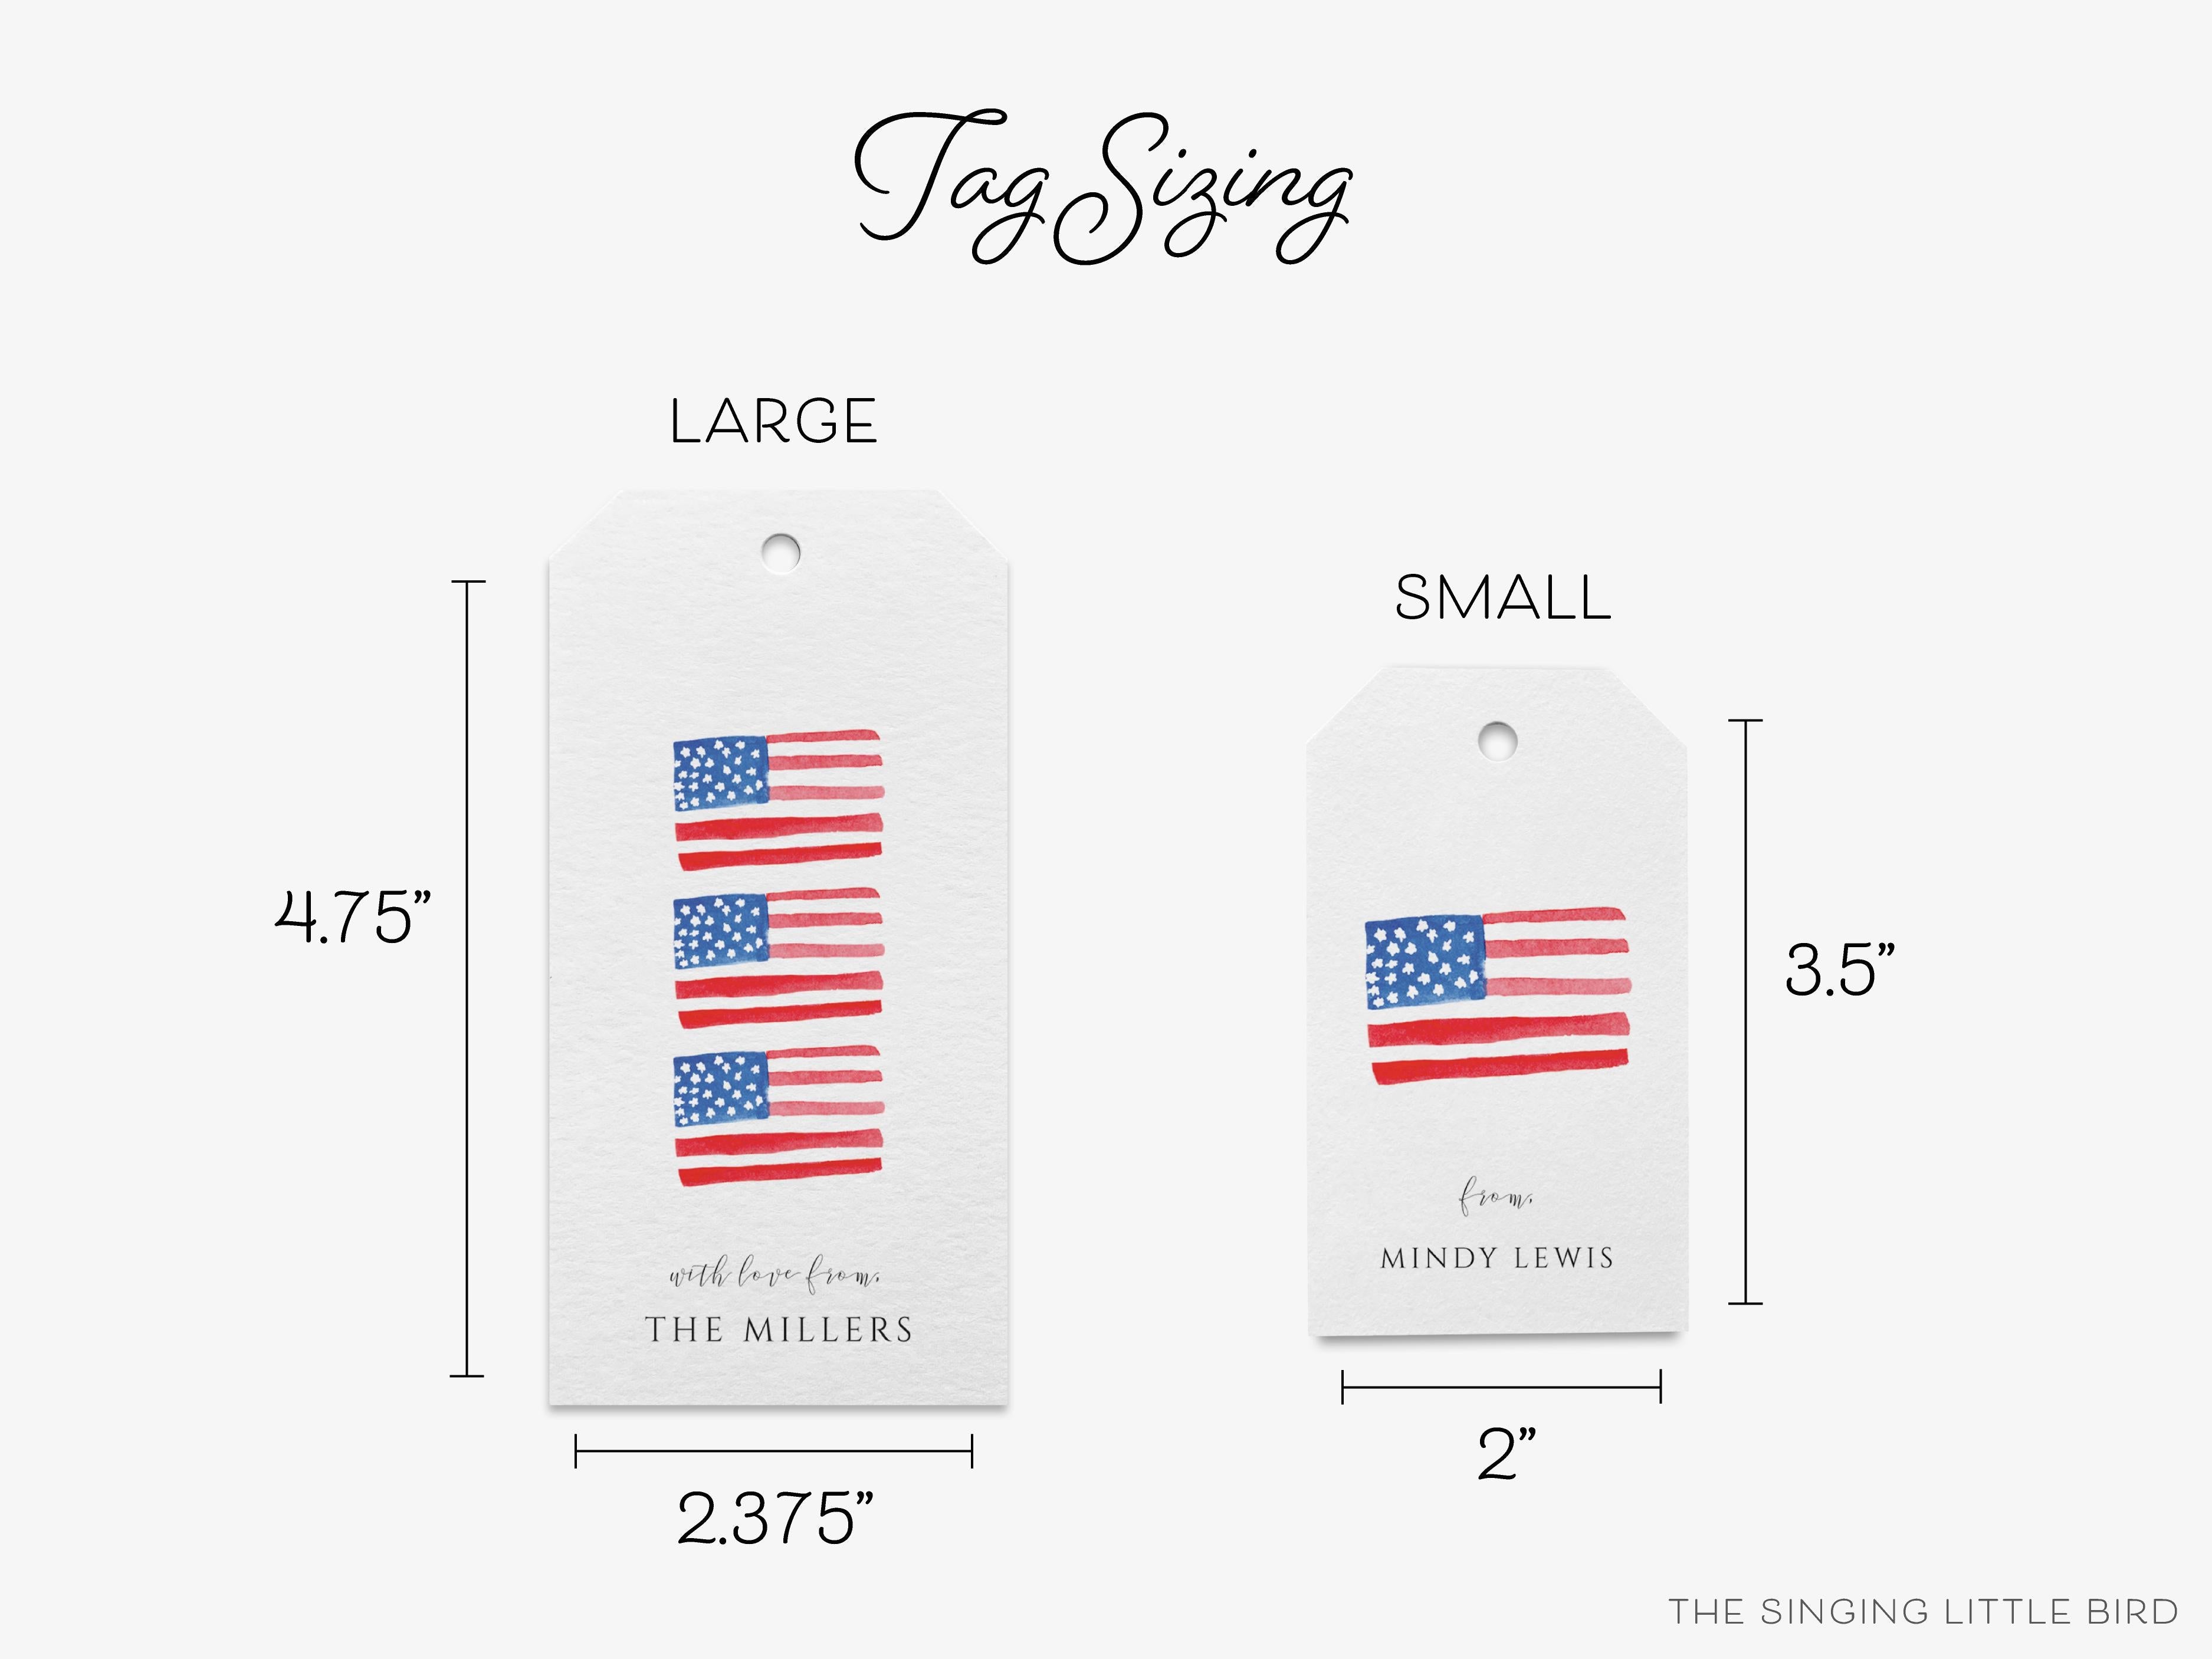 Personalized American Flag Gift Tags-These gift tags come in sets, hole-punched with white twine and feature our hand-painted watercolor American flag, printed in the USA on 120lb textured stock. They make great tags for gifting or gifts for the USA lover in your life.-The Singing Little Bird